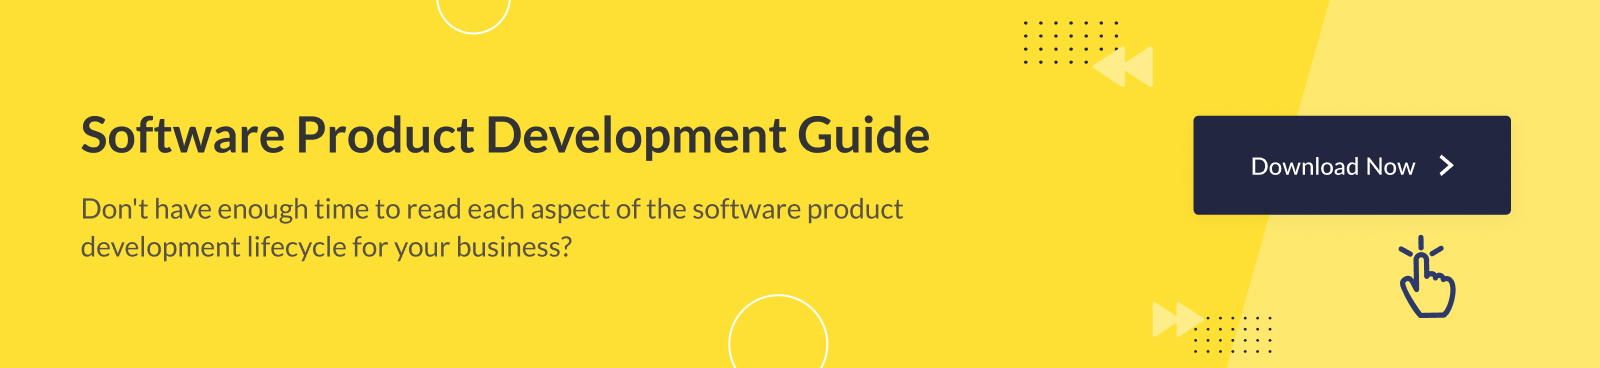 Software Product Development Guide 1